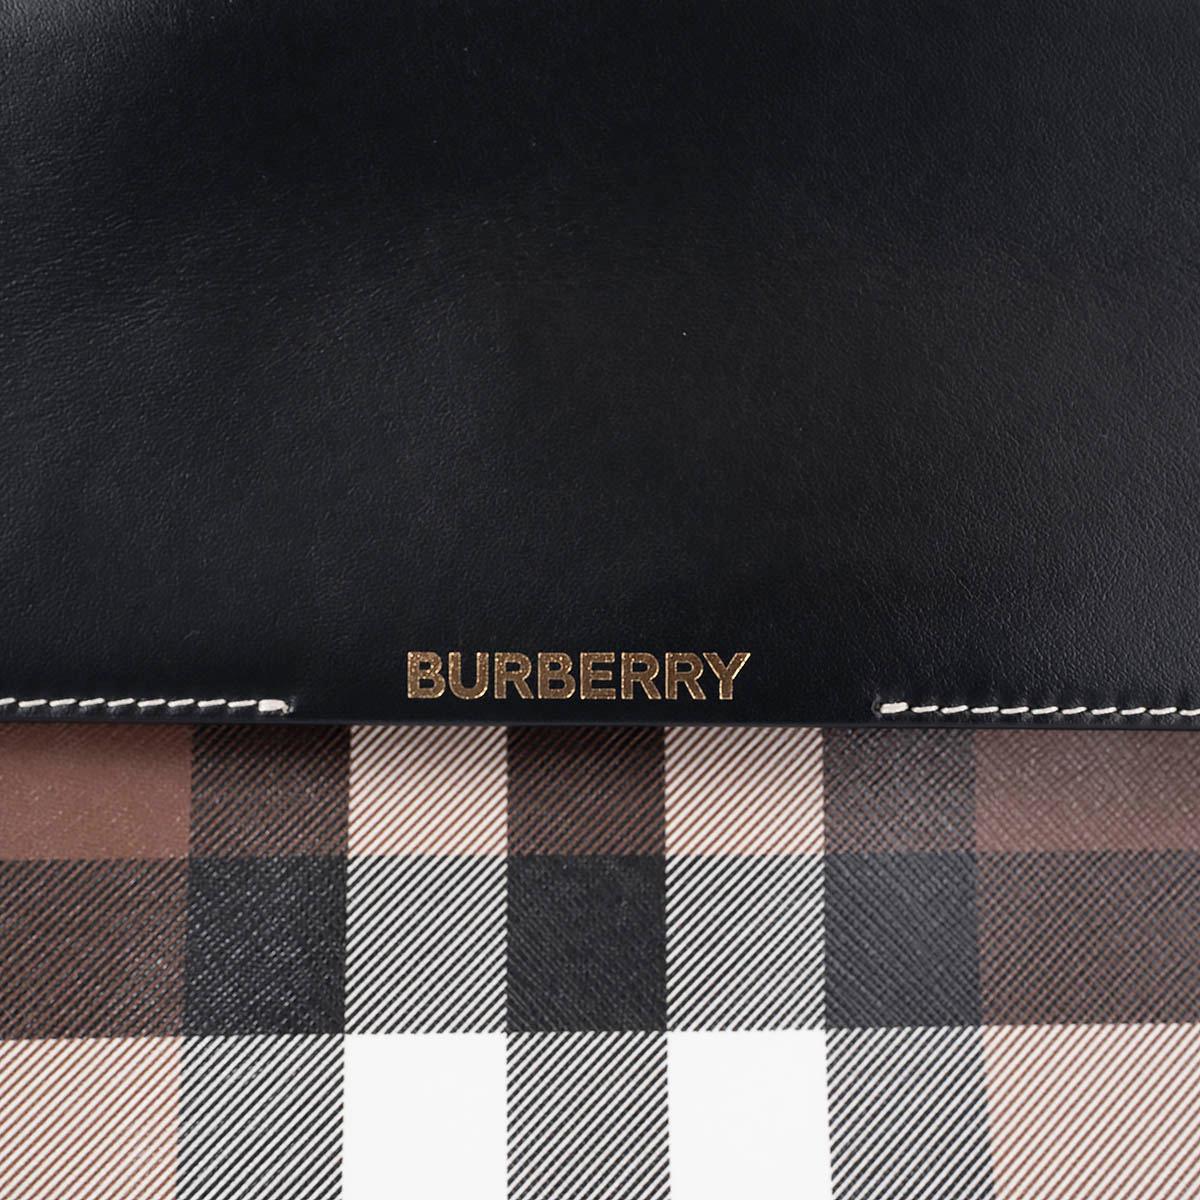 BURBERRY Birch brown check & leather MEDIUM CATHERINE Shoulder Bag For Sale 2